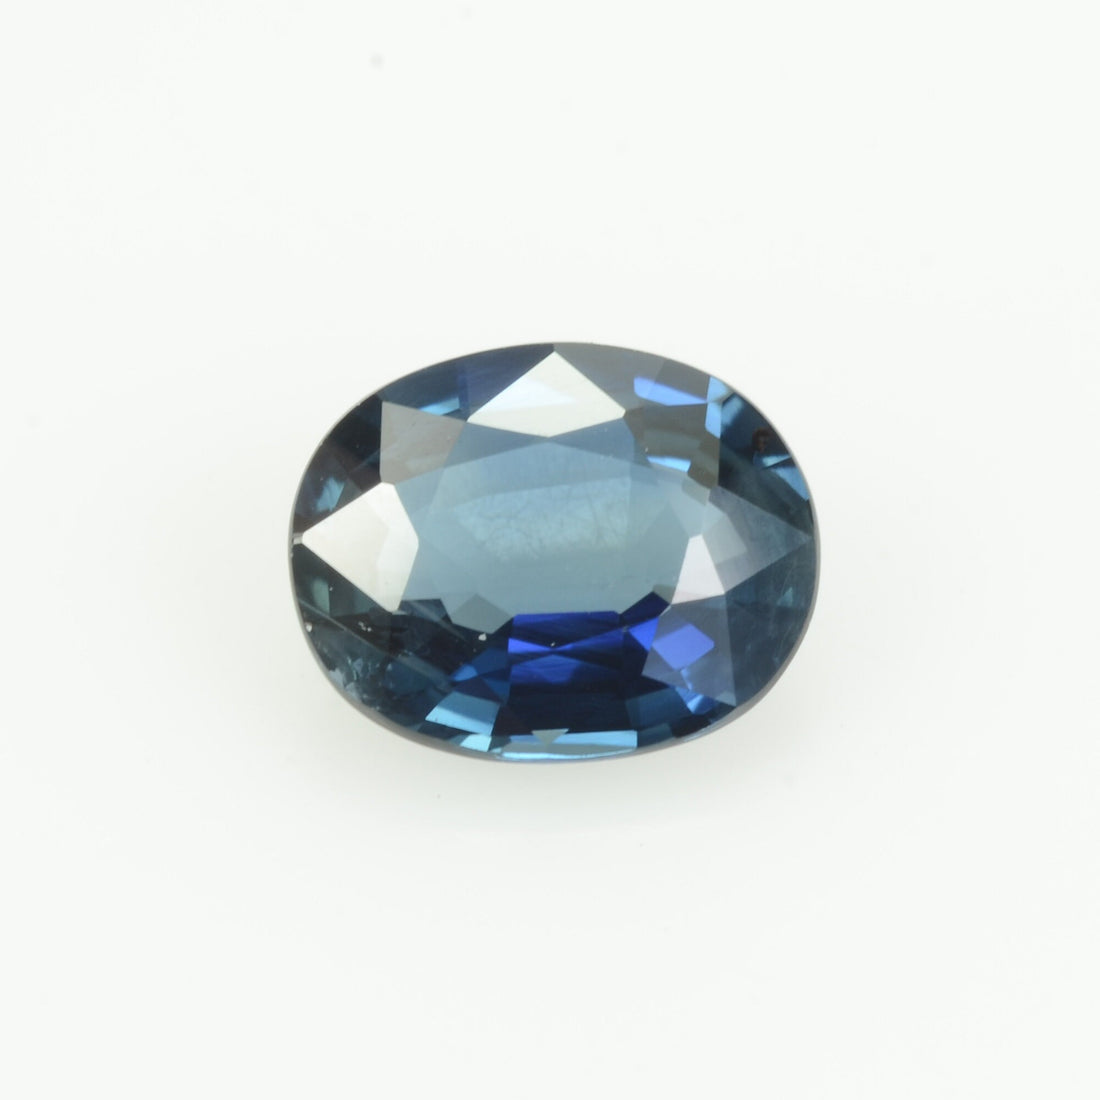 0.74 cts Natural Blue Sapphire Loose Gemstone Oval Cut